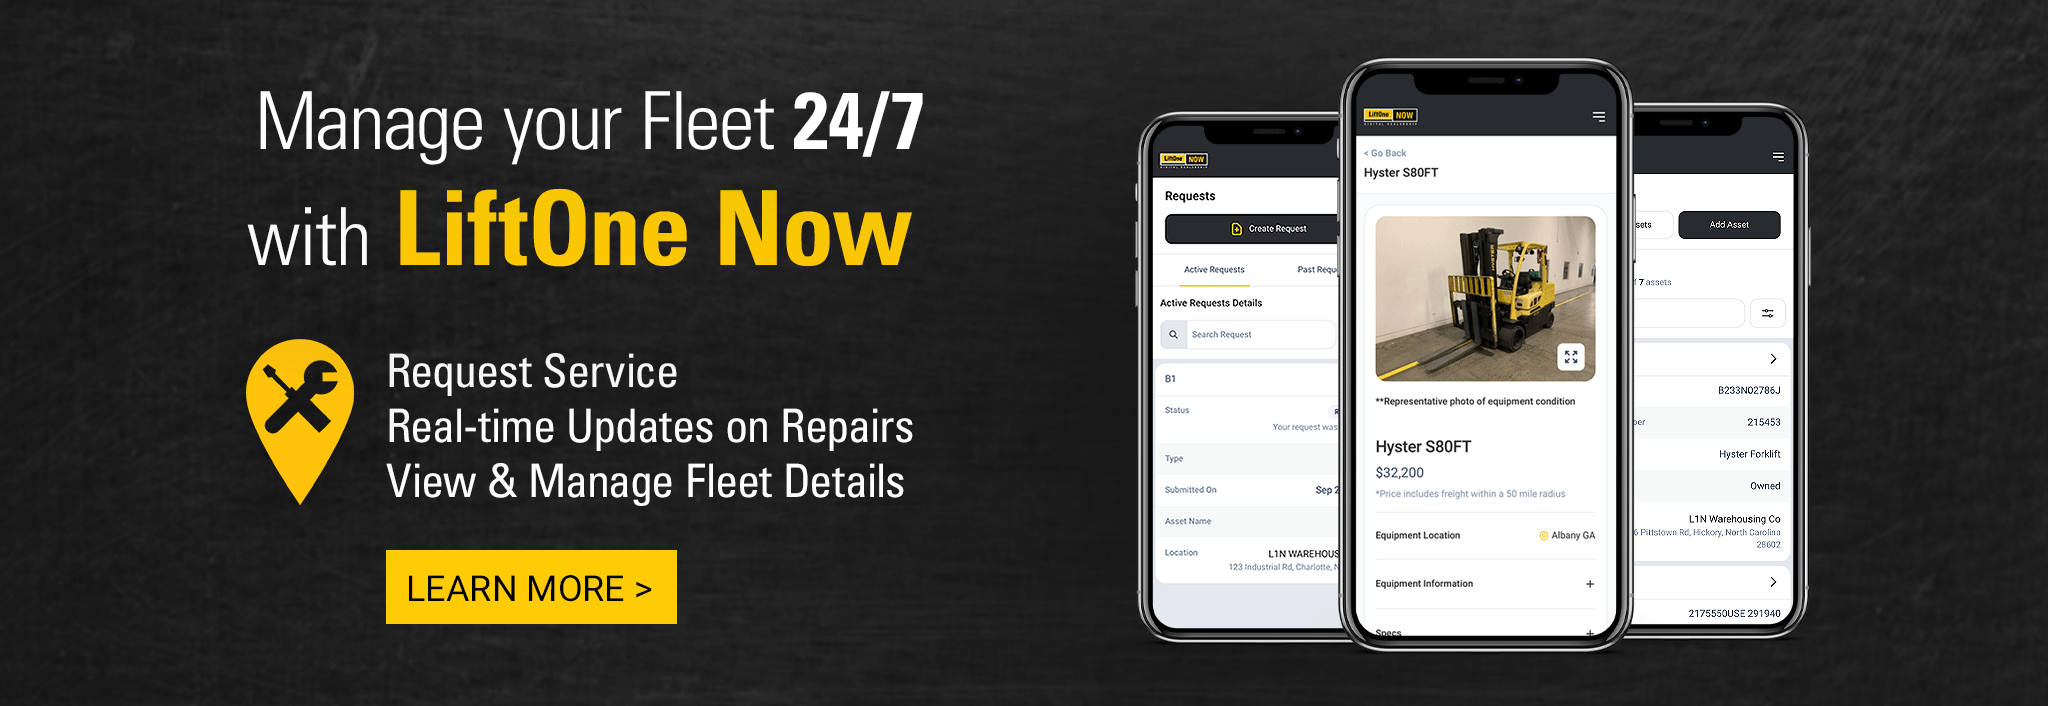 Manage your fleet /7 with LiftOne Now